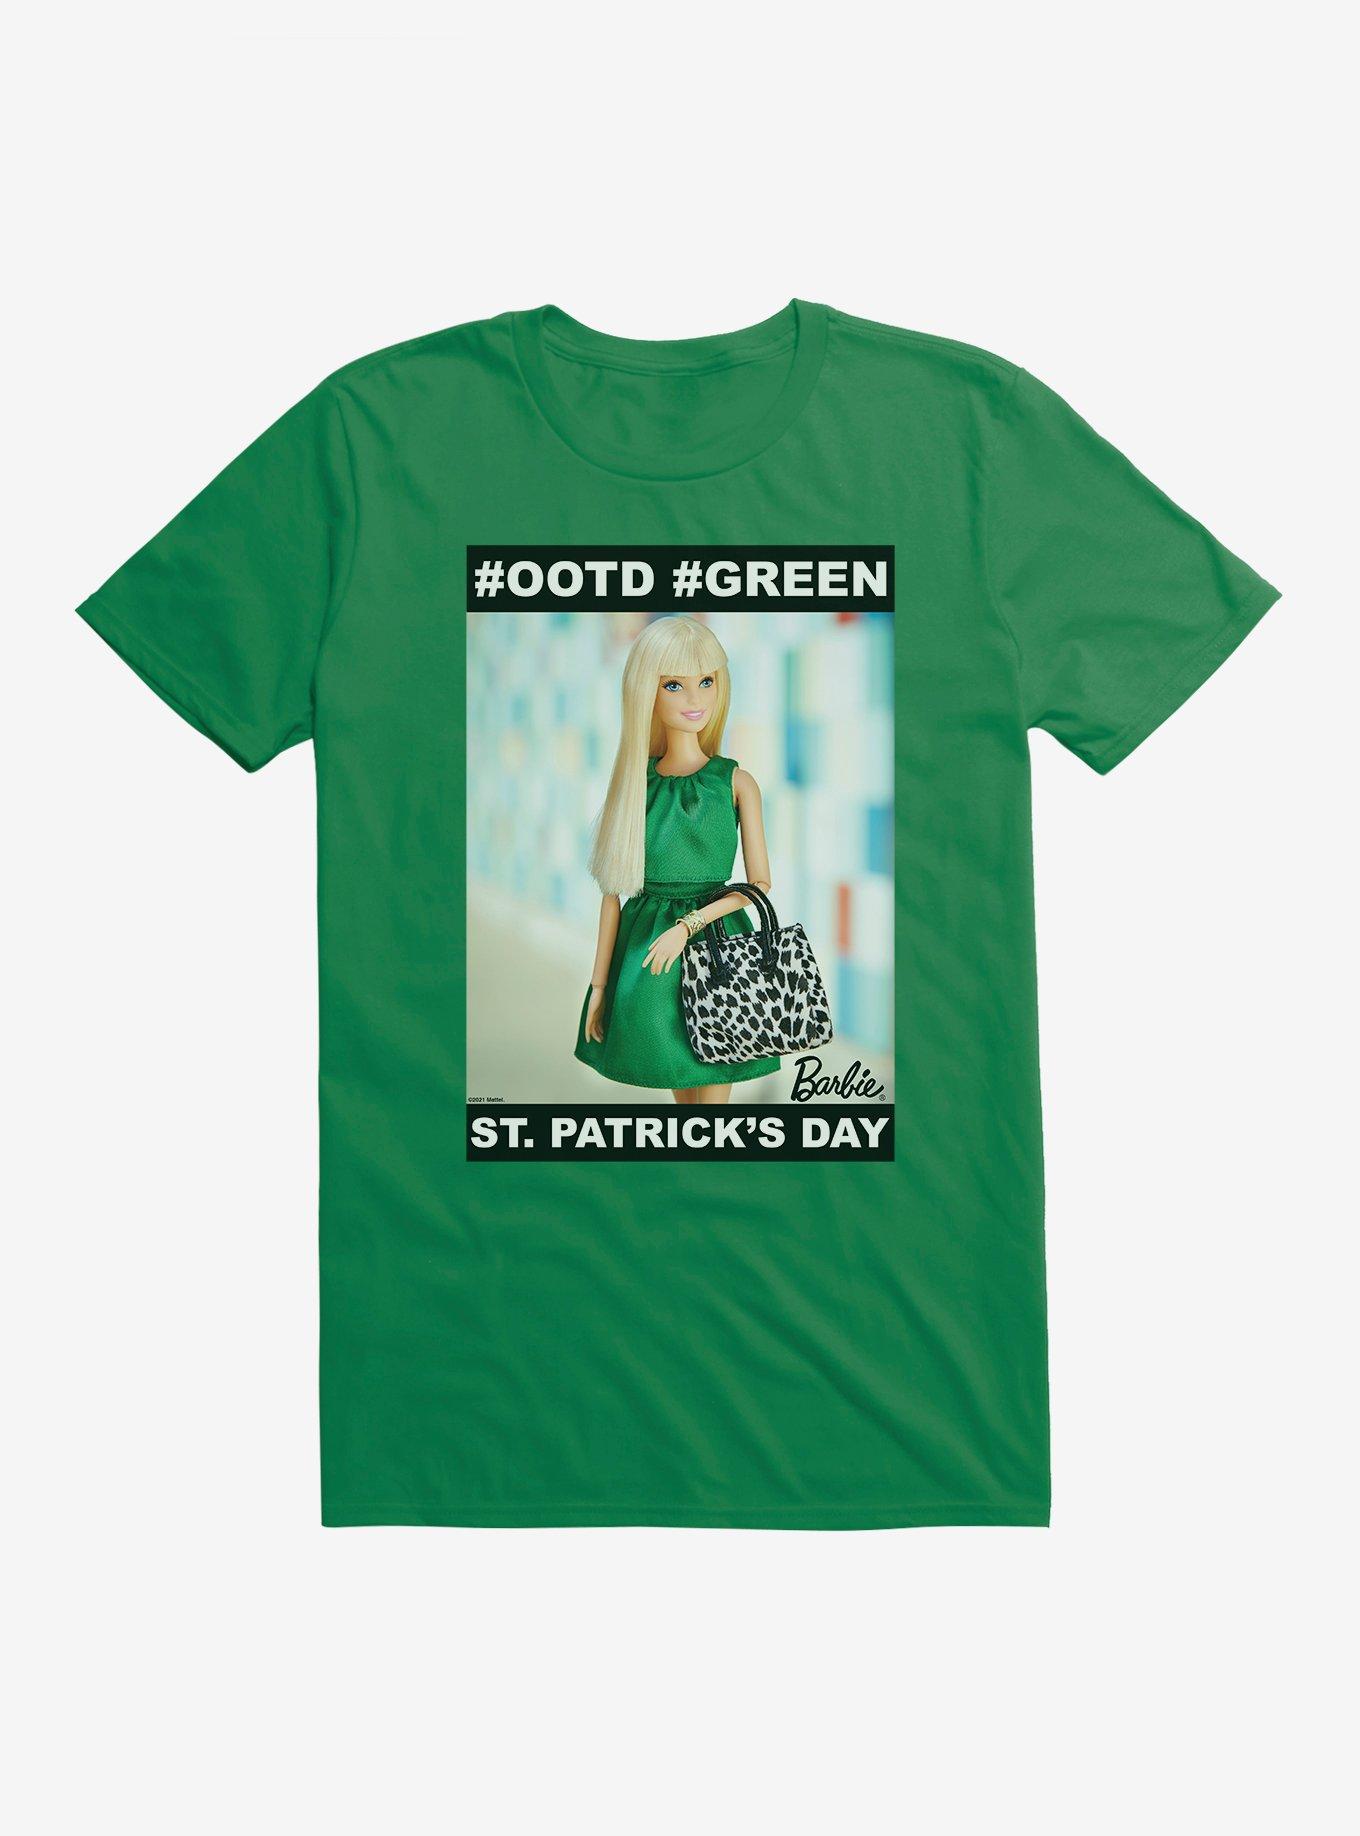 Barbie St. Patrick's Day #OOTD #GREEN T-Shirt, KELLY GREEN, hi-res